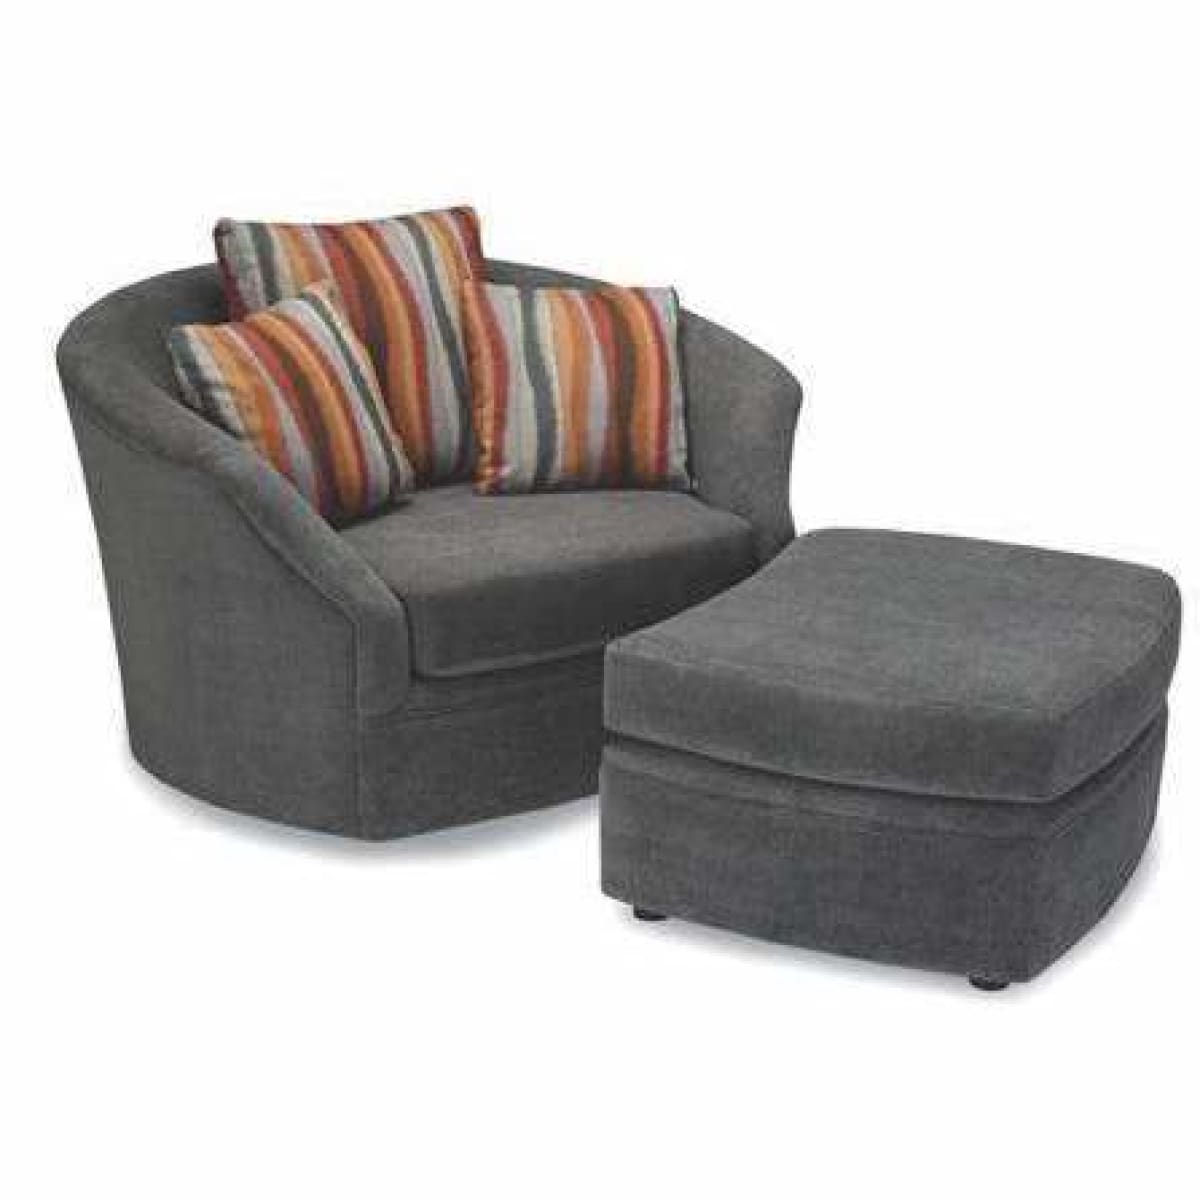 Swirl Accent Chair And Ottoman - accent chairs